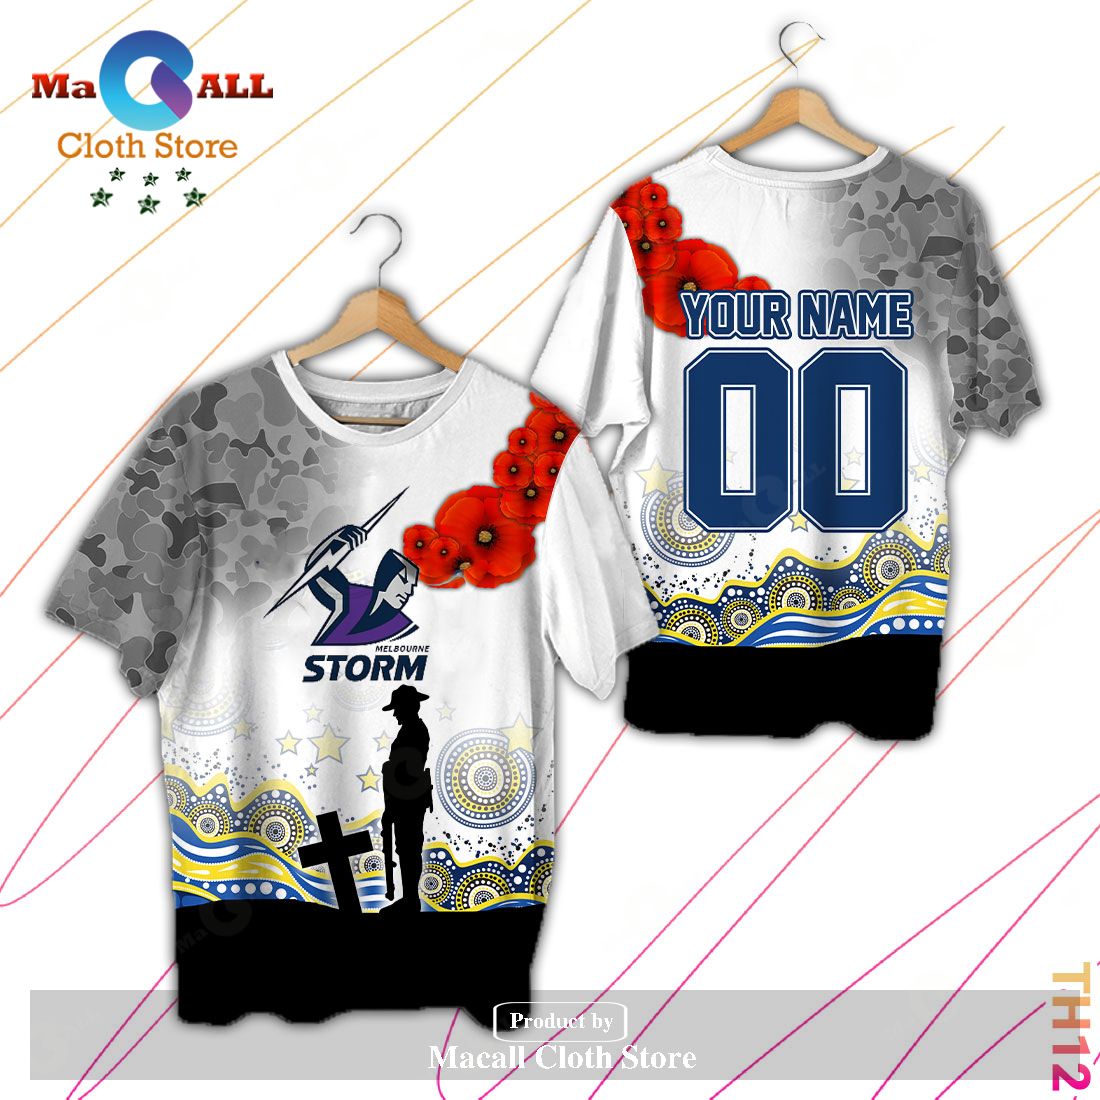 NRL Melbourne Storm Custom Name Number 2023 ANZAC Jersey T-Shirt